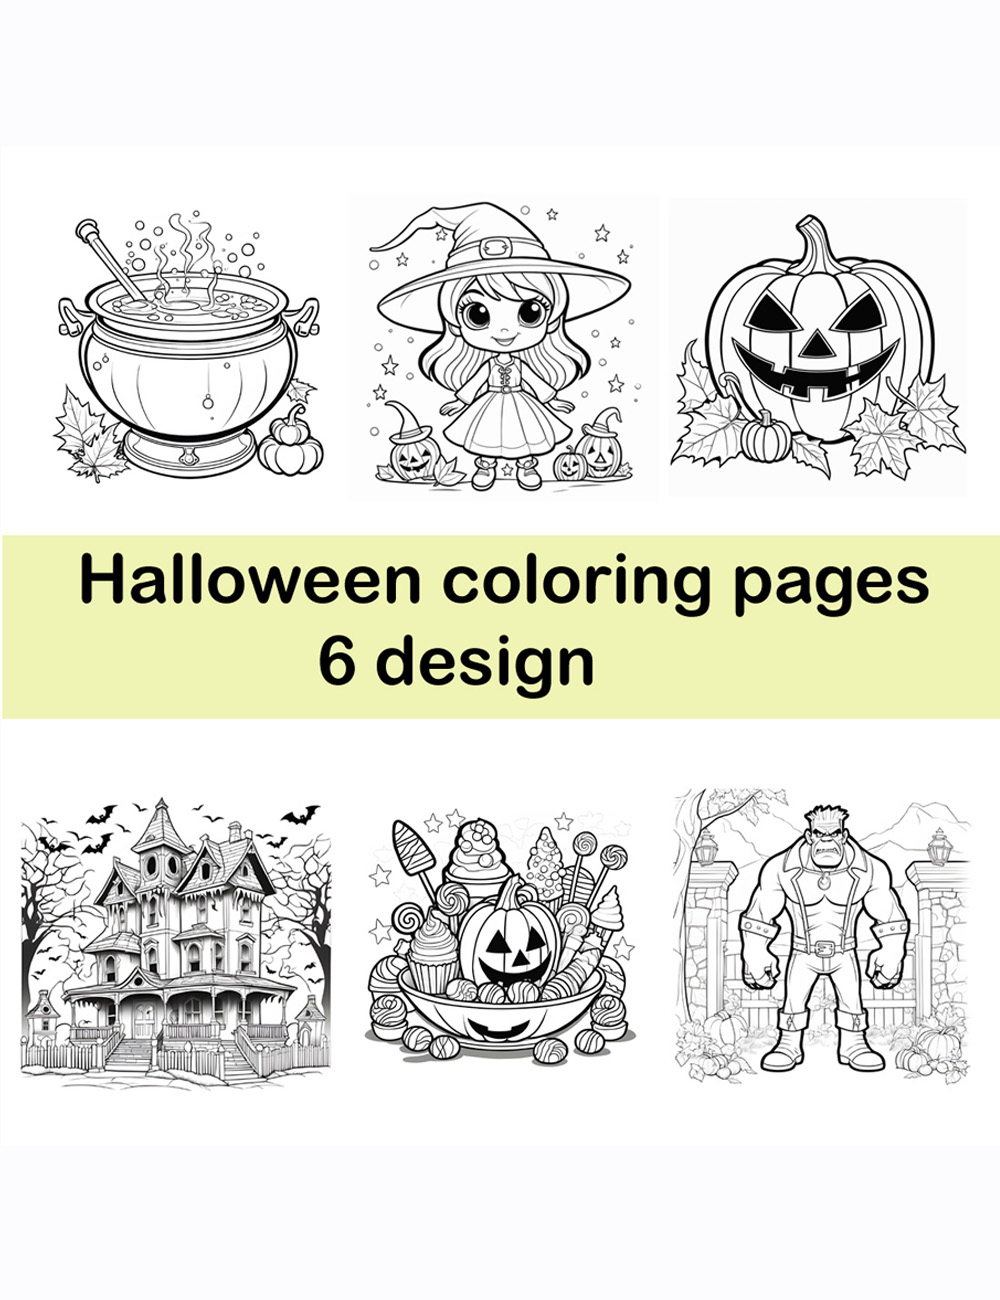 Halloween coloring pages pinterest preview image.